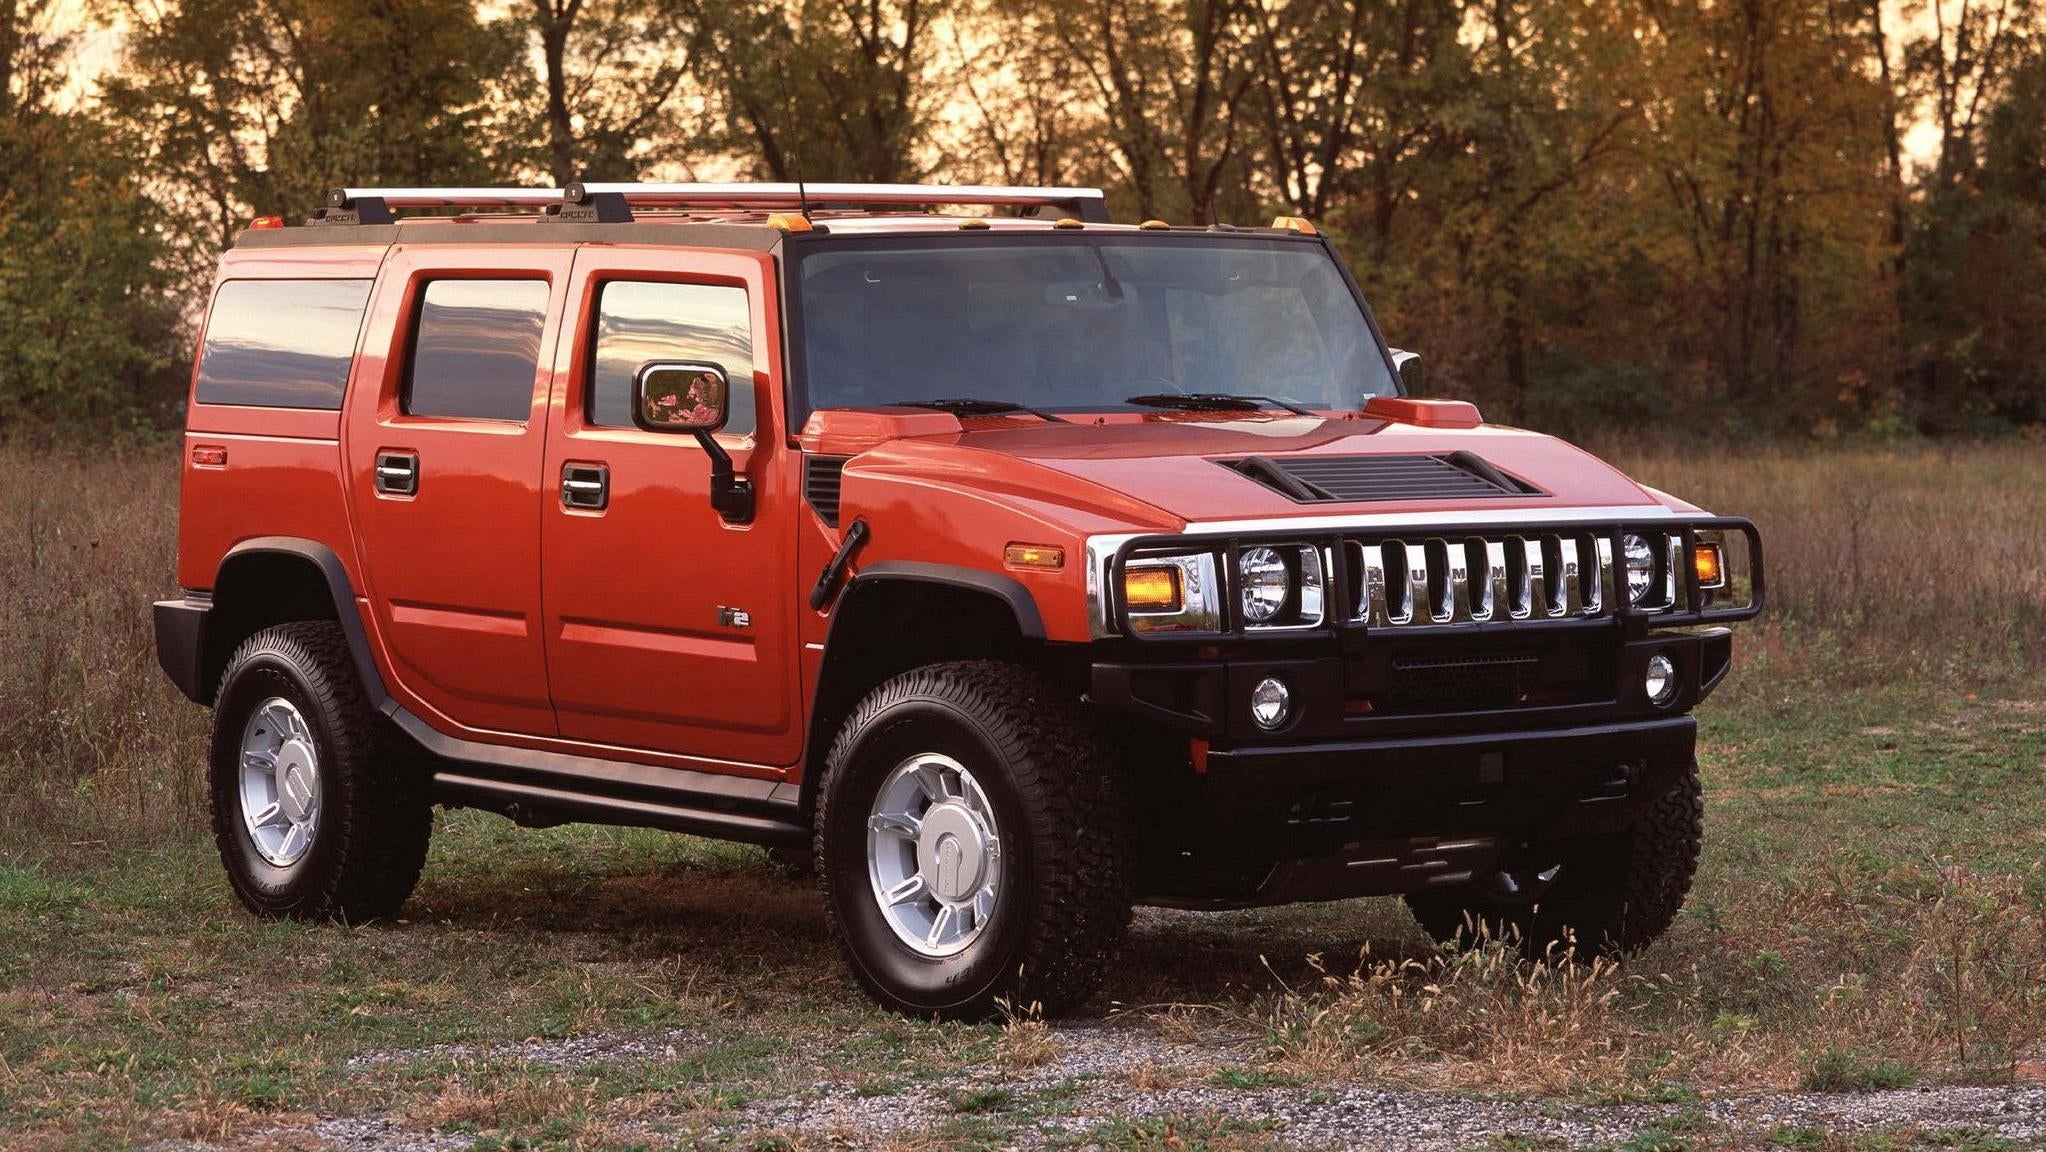 The Worst-Looking Cars of All Time, According to You